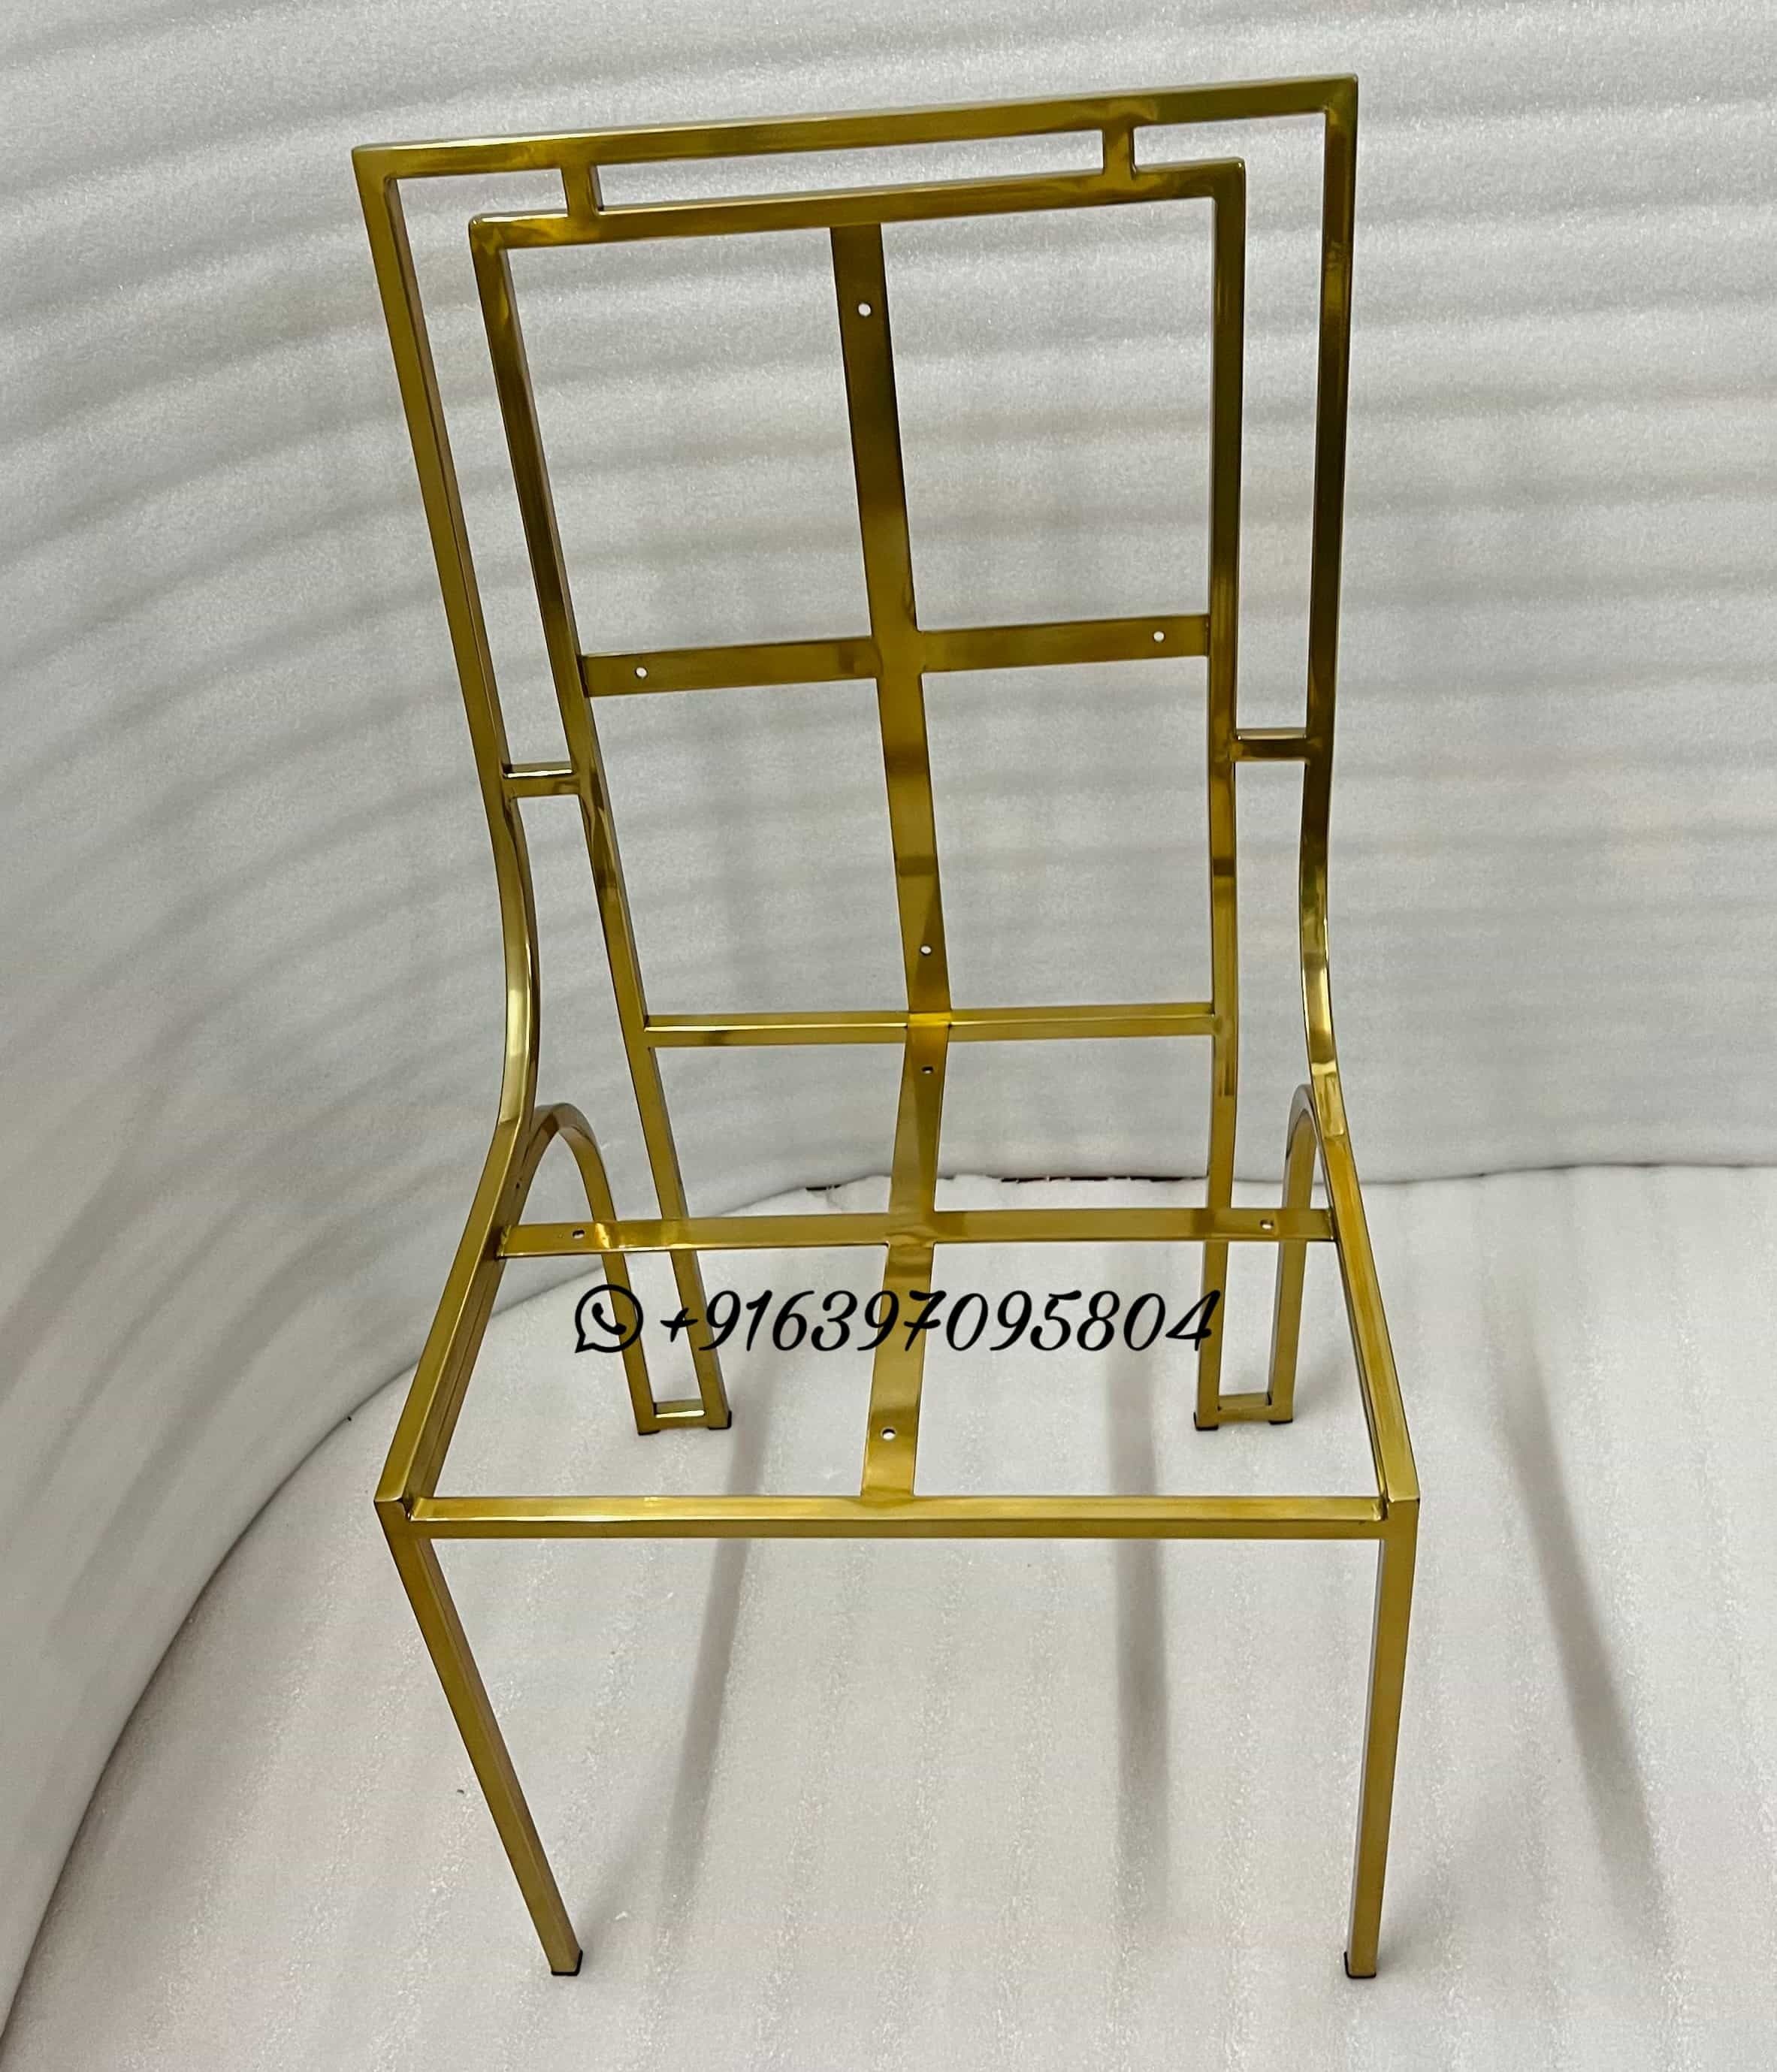 Stainless Steel Chair frame with gold mirror finish